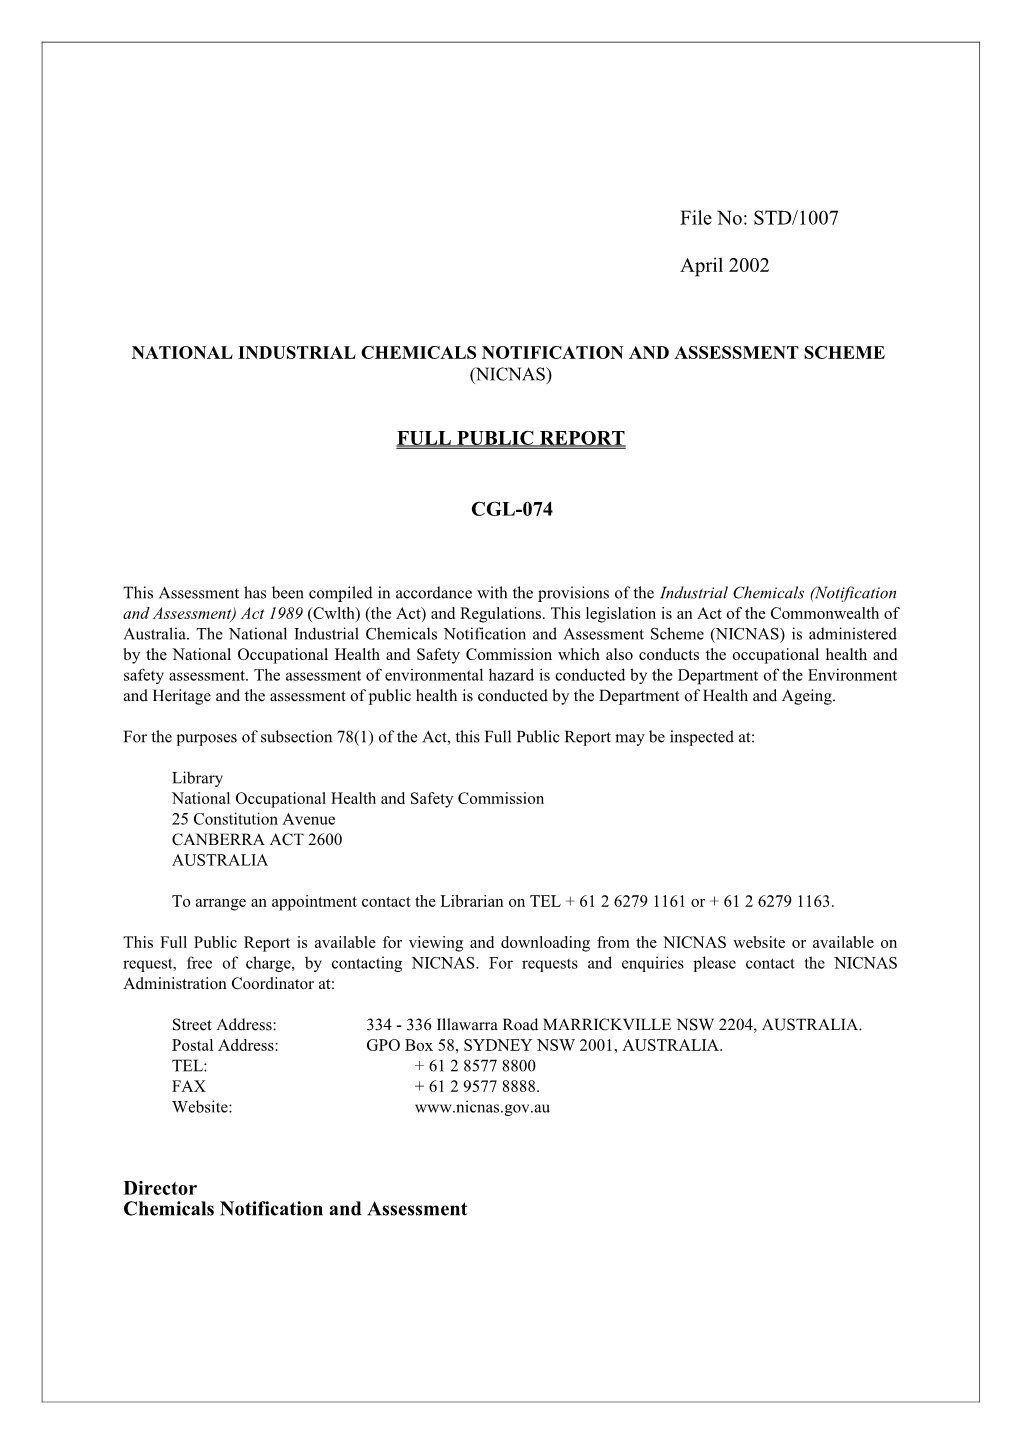 National Industrial Chemicals Notification and Assessment Scheme s26